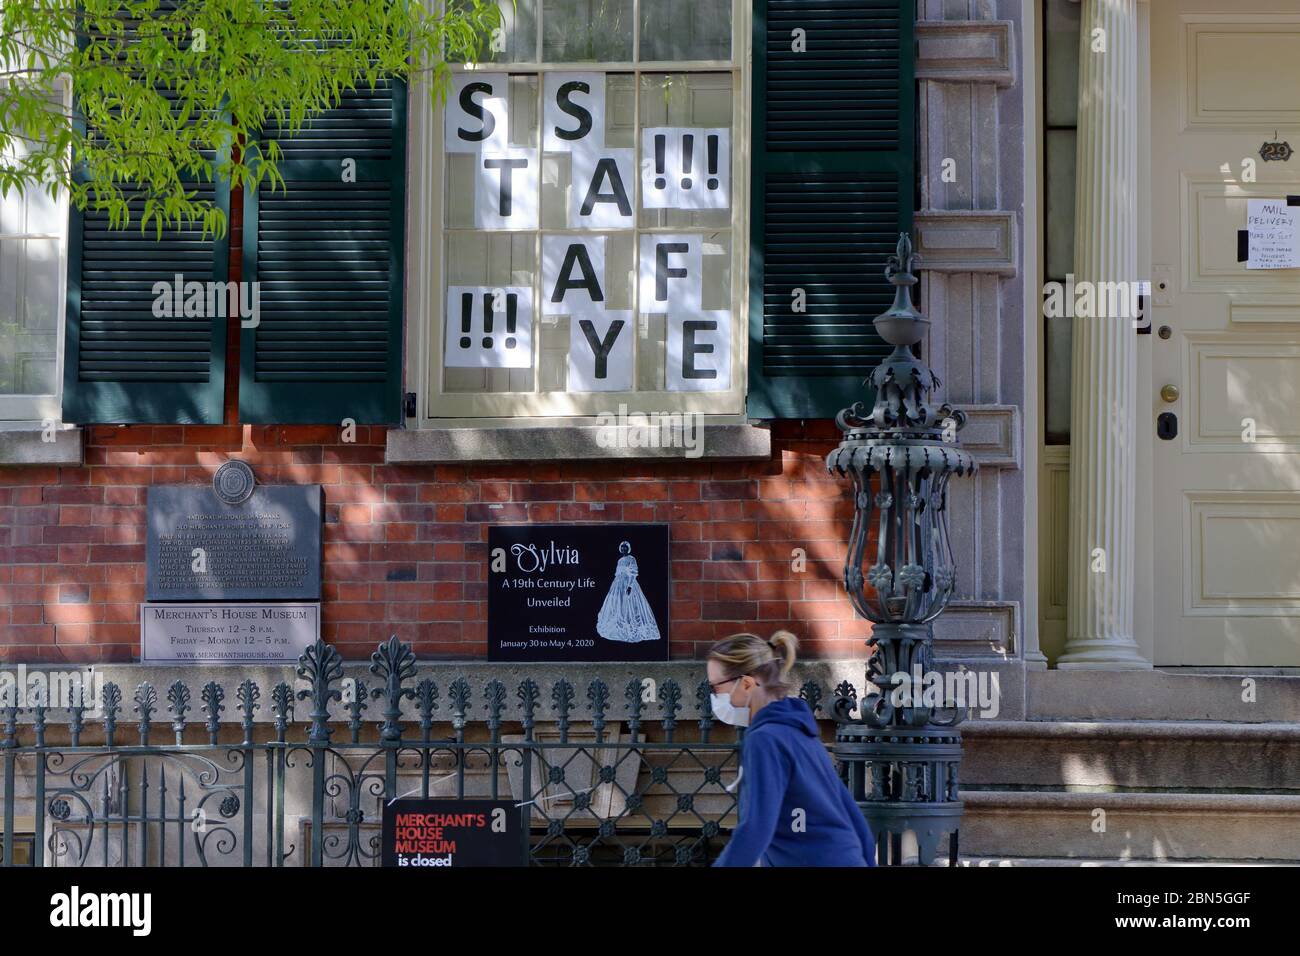 Merchant S House Museum New York High Resolution Stock Photography And Images Alamy